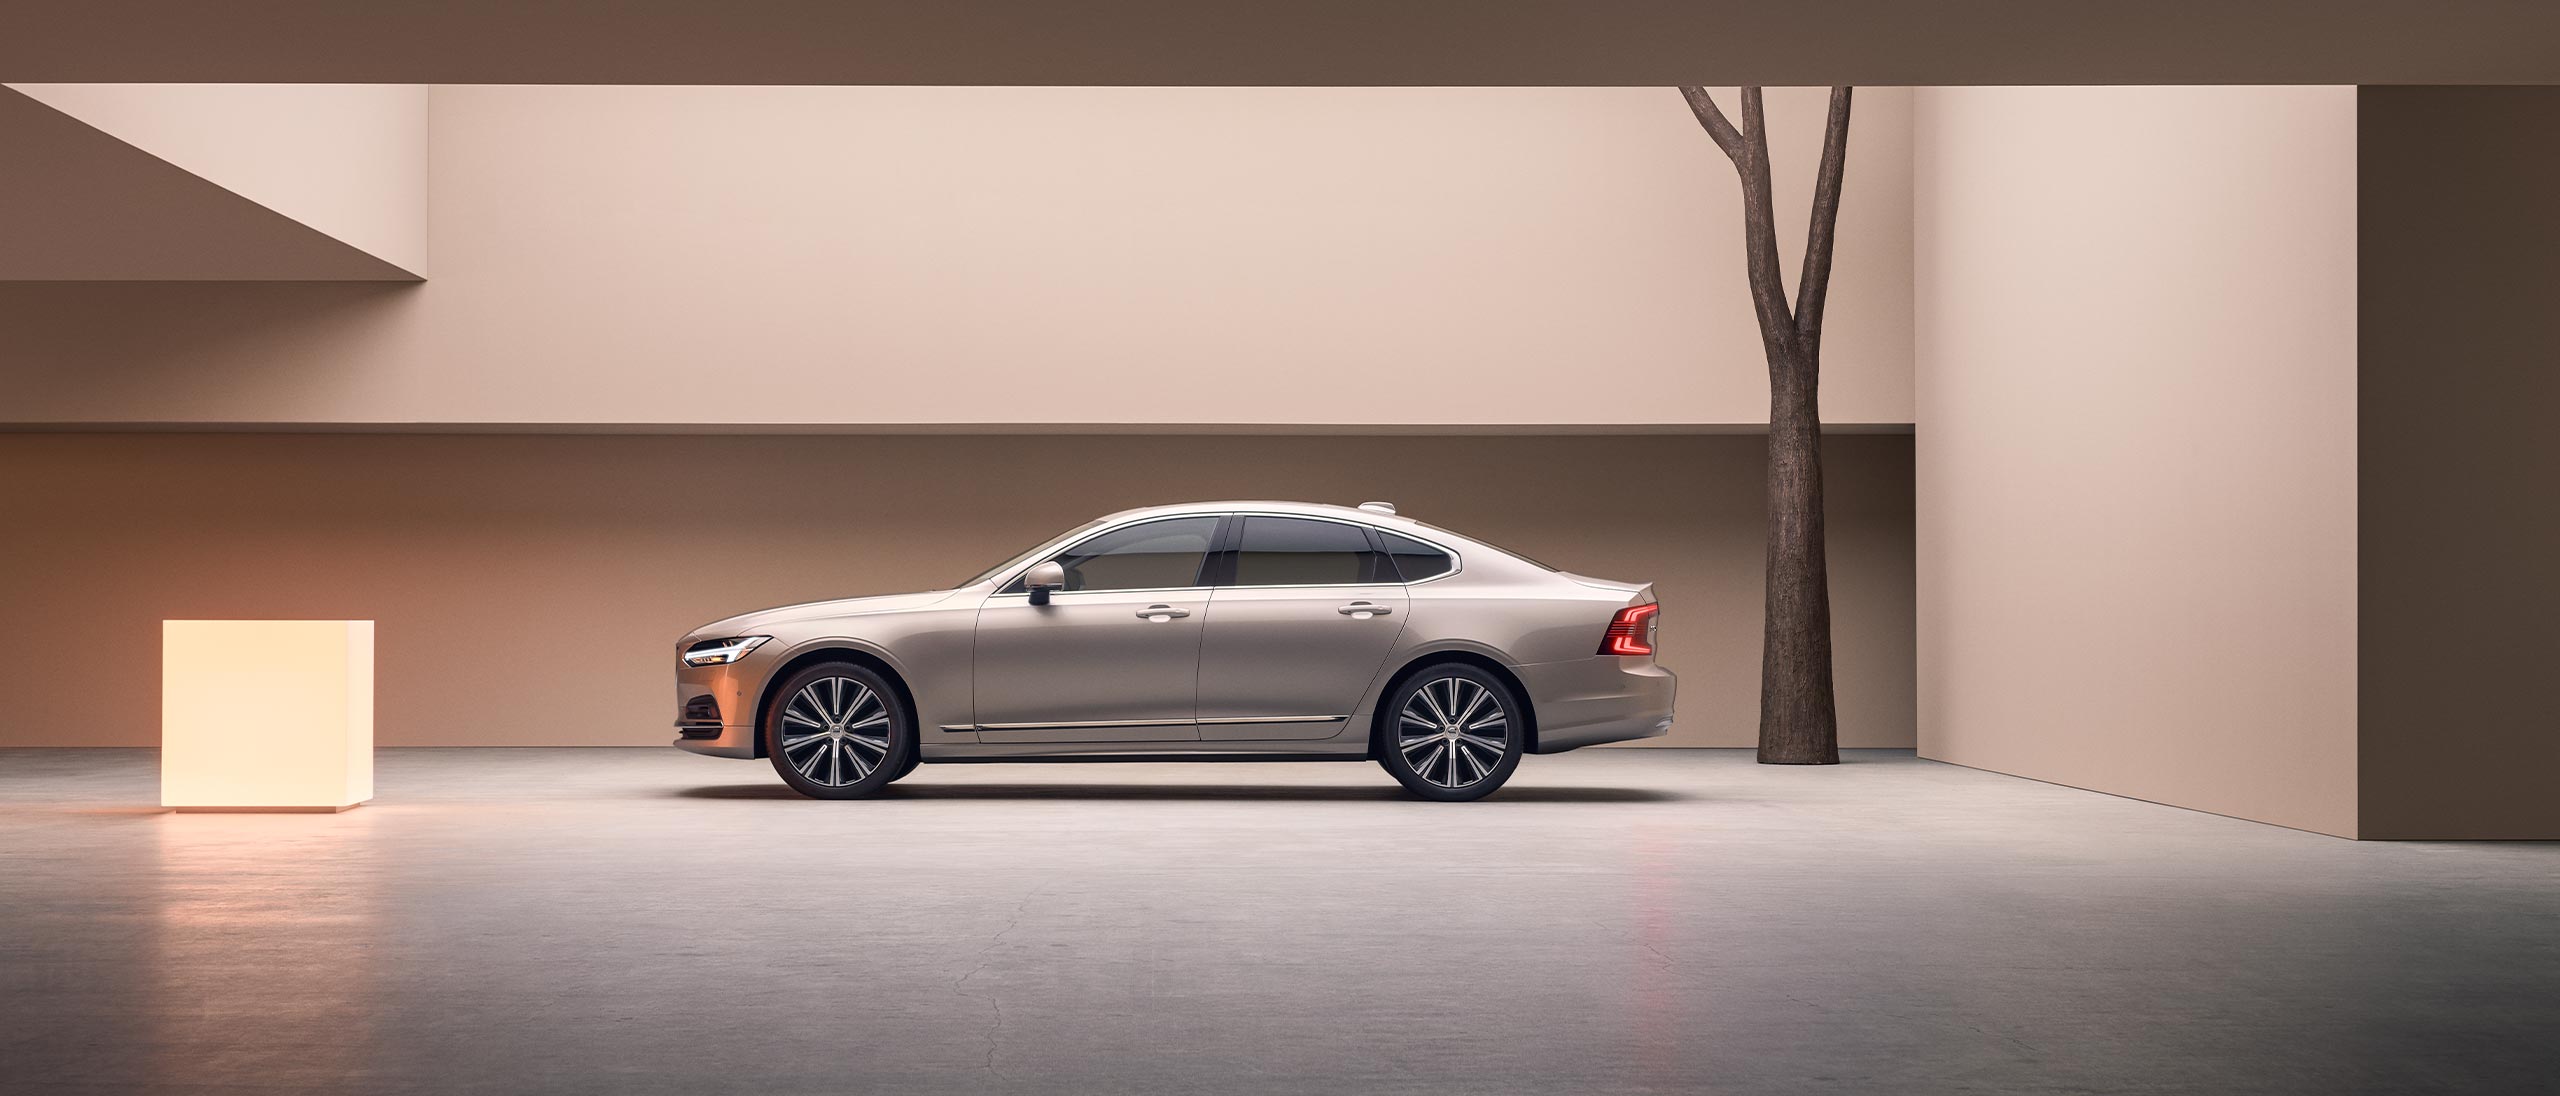 A wide-angle image of the left side of a Volvo S90 parked in a large concrete structure.